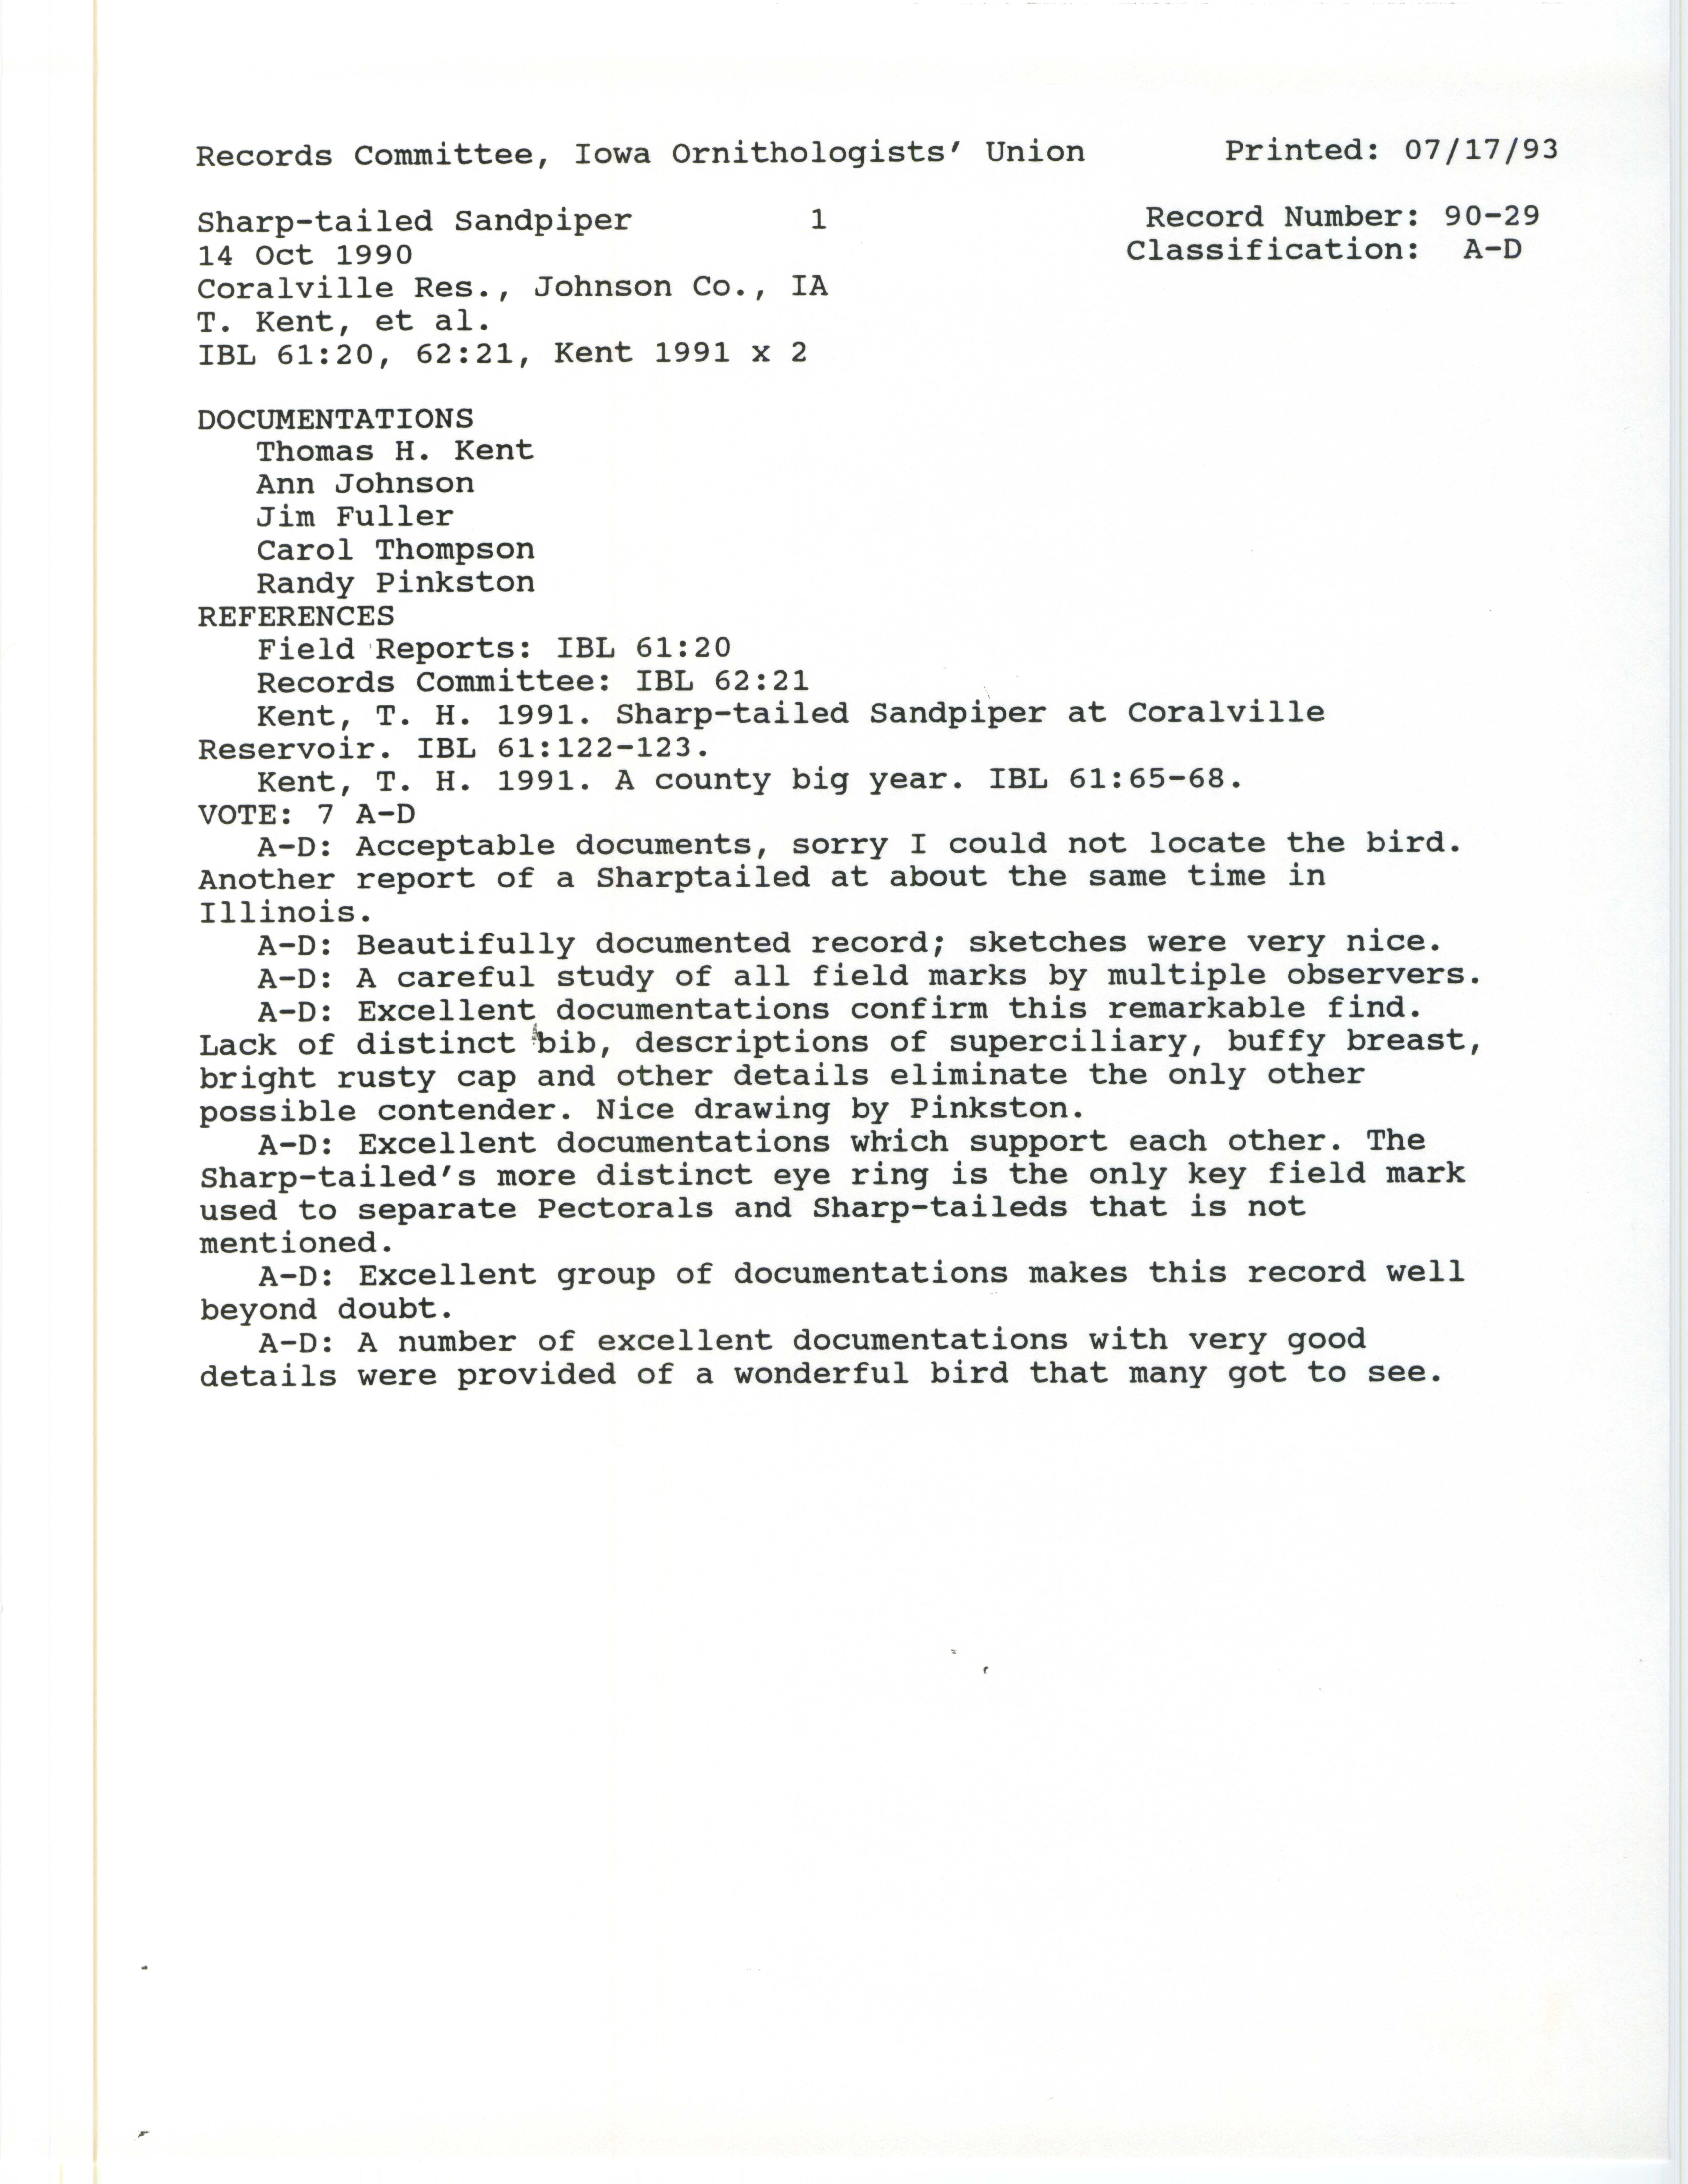 Records Committee review for rare bird sighting of Sharp-tailed Sandpiper at Coralville Reservoir, 1990